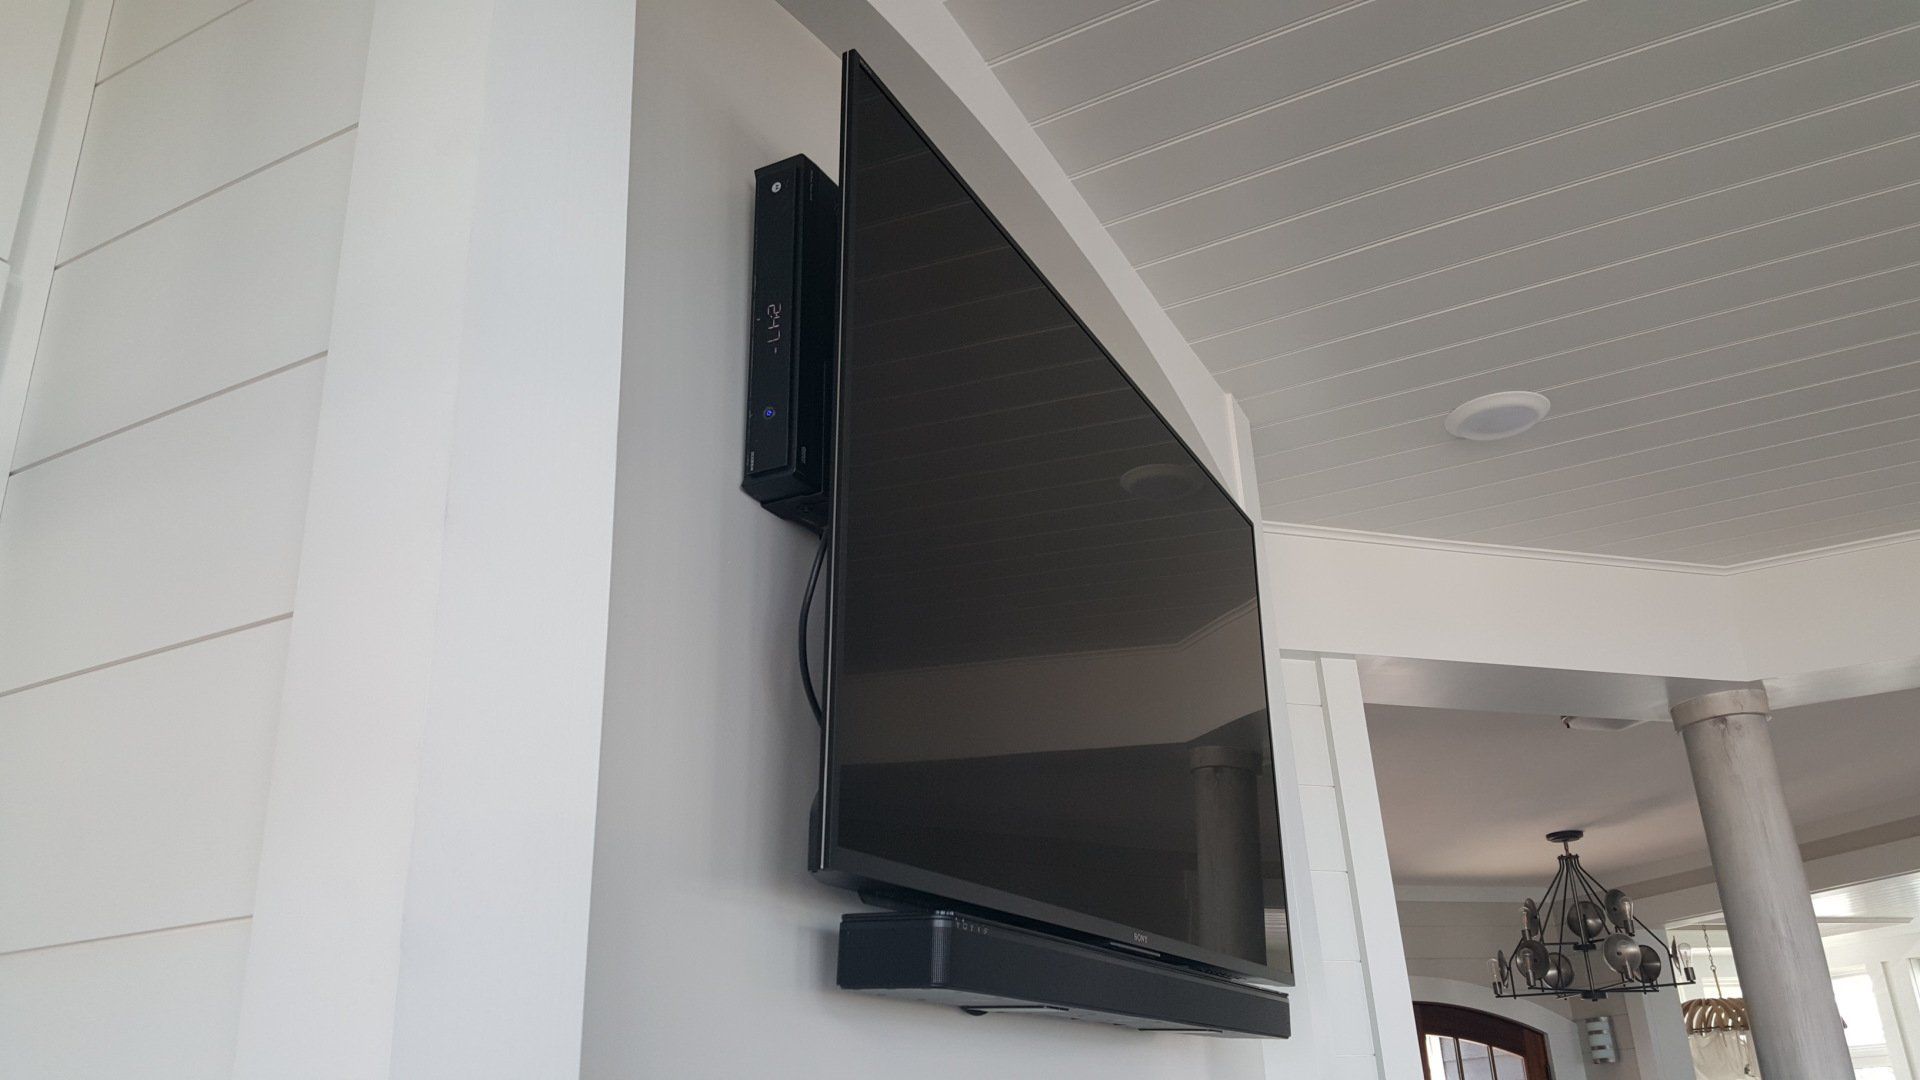 a flat screen tv mounted on a white wall with a cable box mounted behind the TV in northern ohio